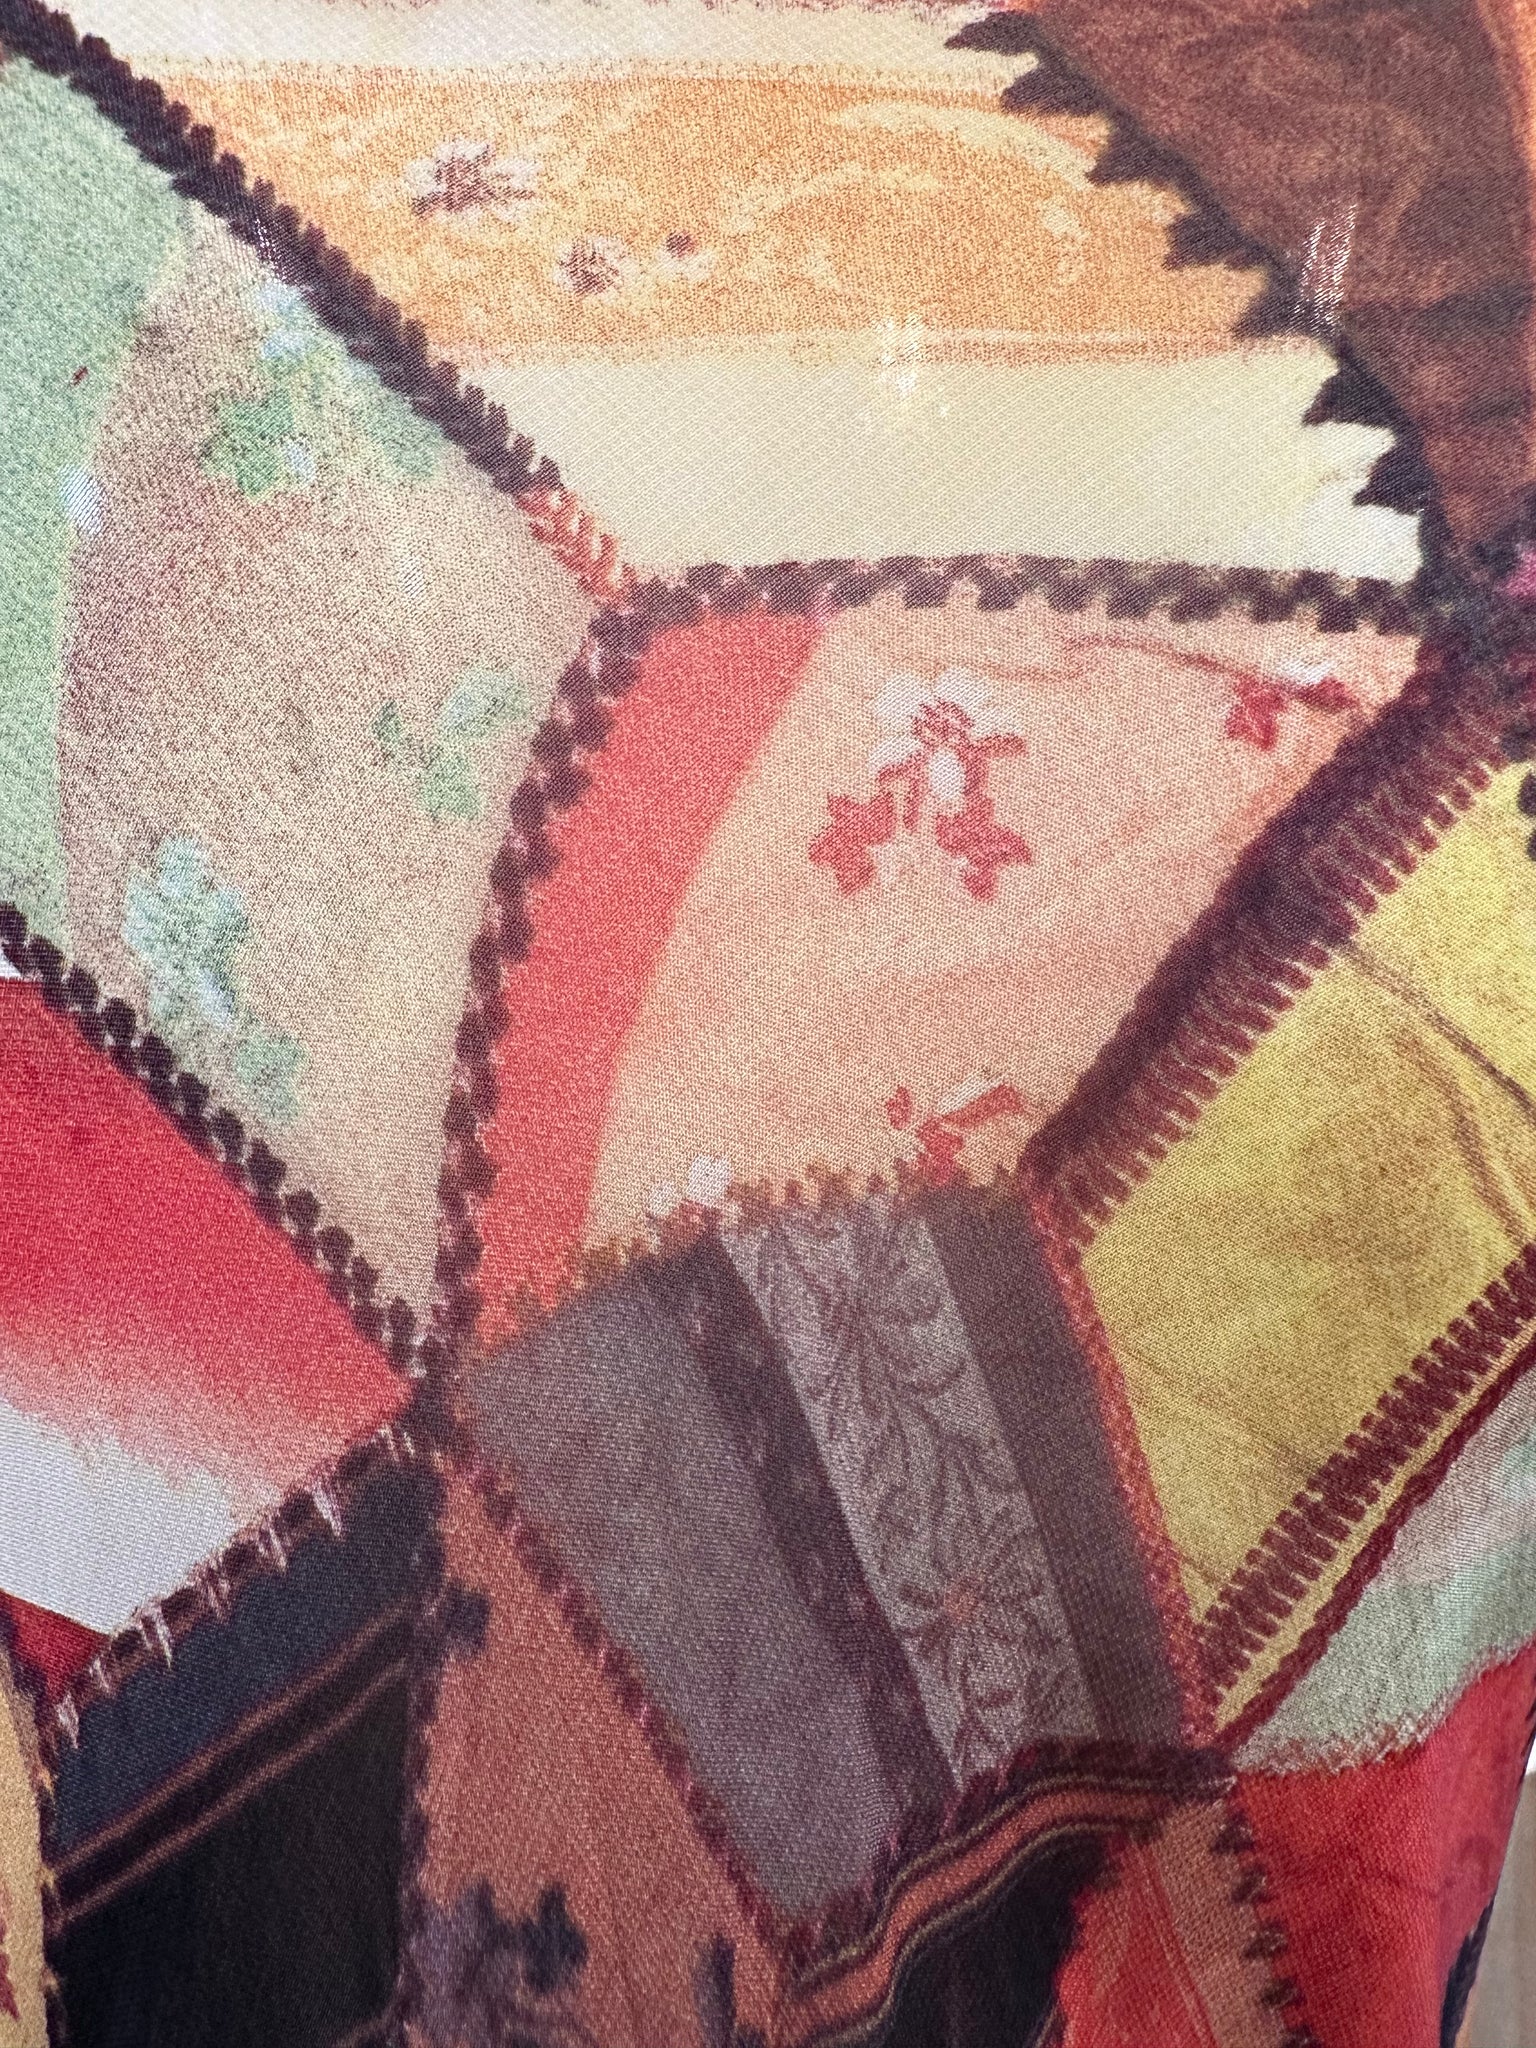  Moschino Cheap and Chic 1990s Mesh Trompe L'oeil Crazy Quilt Patchwork Fringed Shawl PRINT 4 of 5